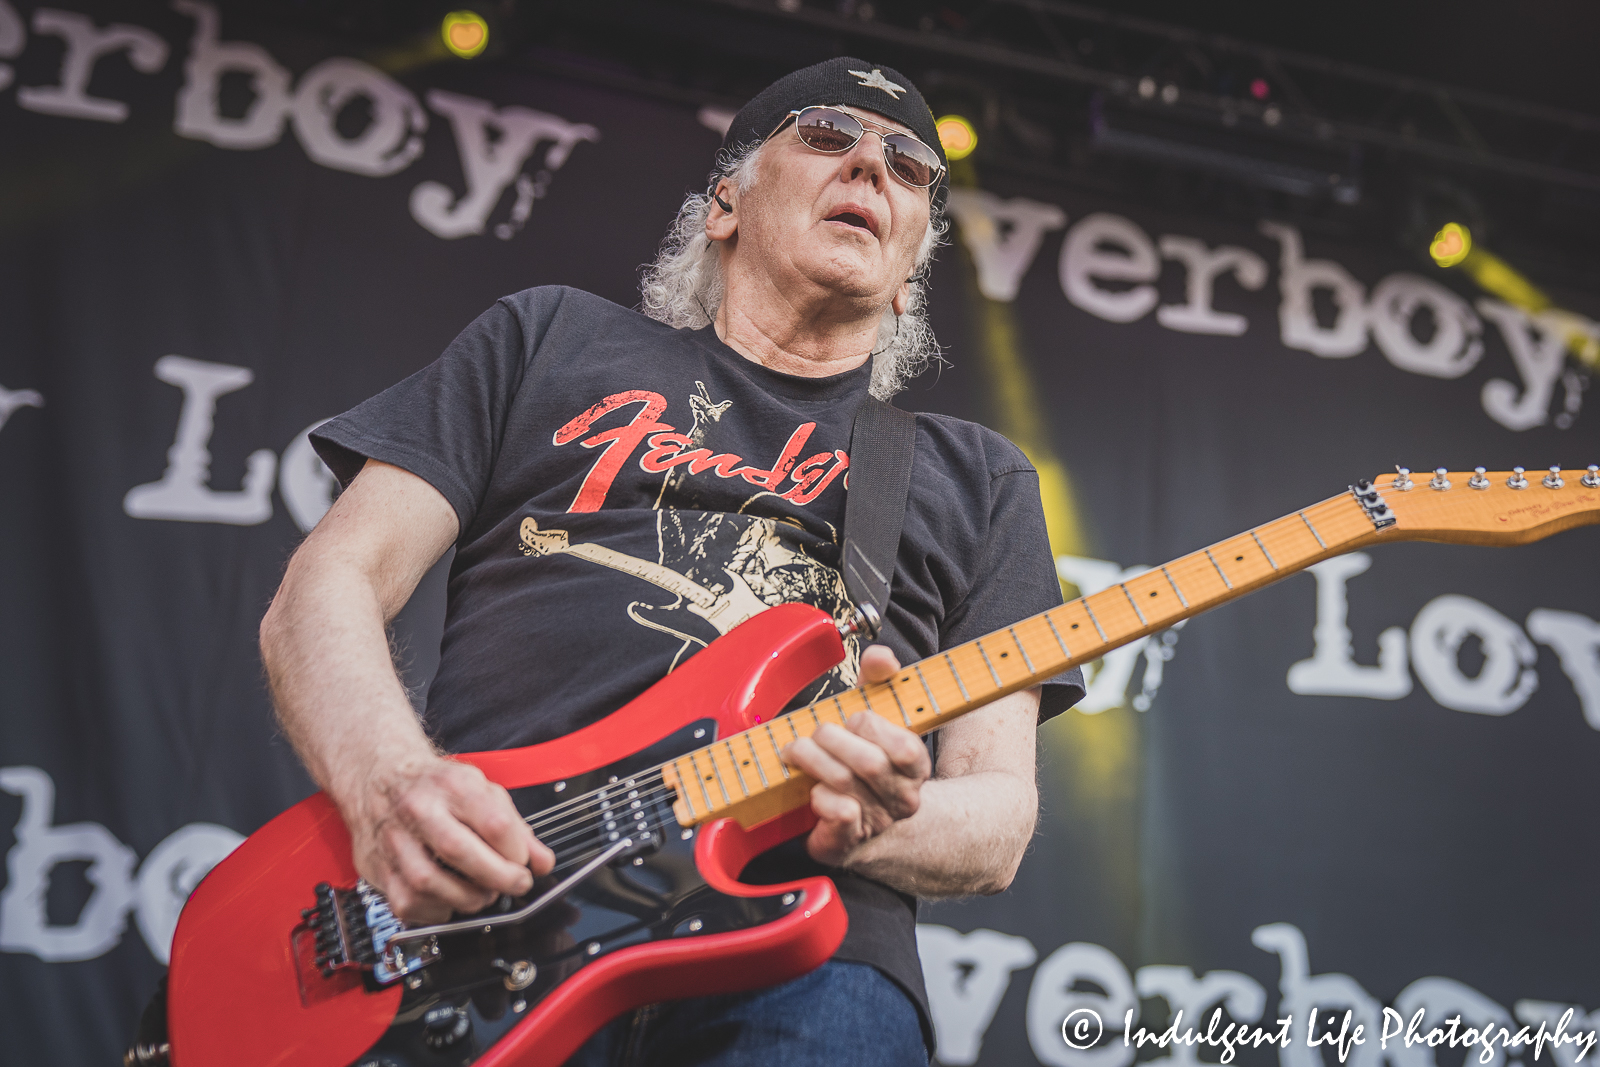 Loverboy guitarist Paul Dean performing live in concert at Starlight Theatre in Kansas City, MO on June 14, 2022.